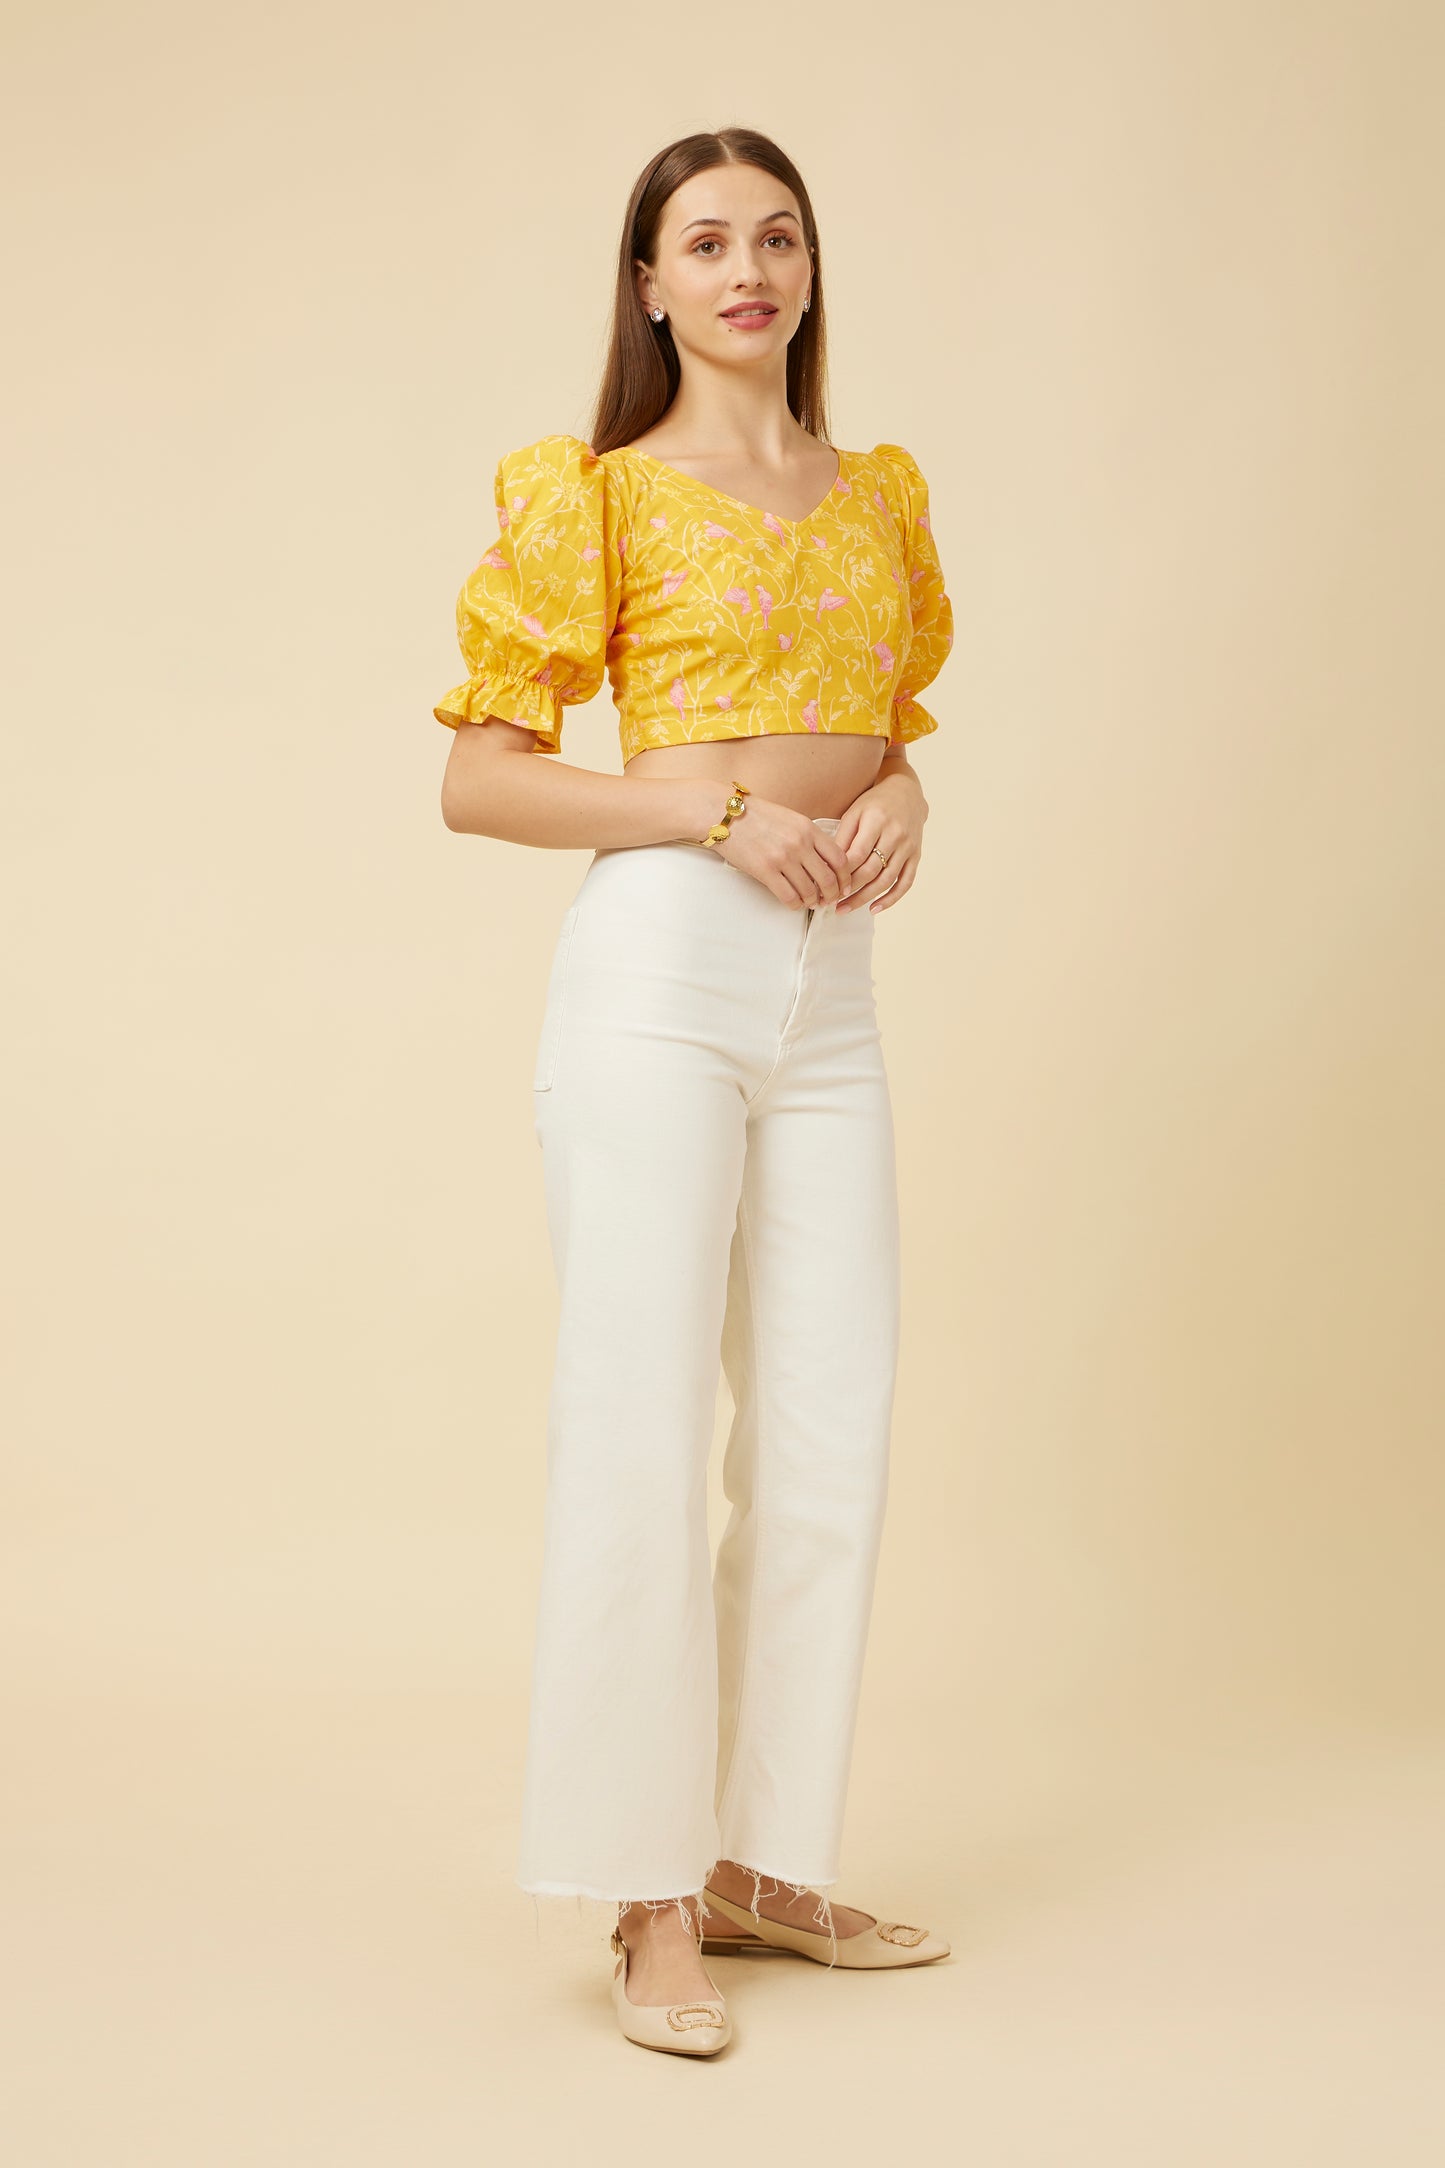 Three-quarter view of a model in the Peela Sunshine Crop Top, featuring a unique back design and paired with elegant white pants for a bright outfit